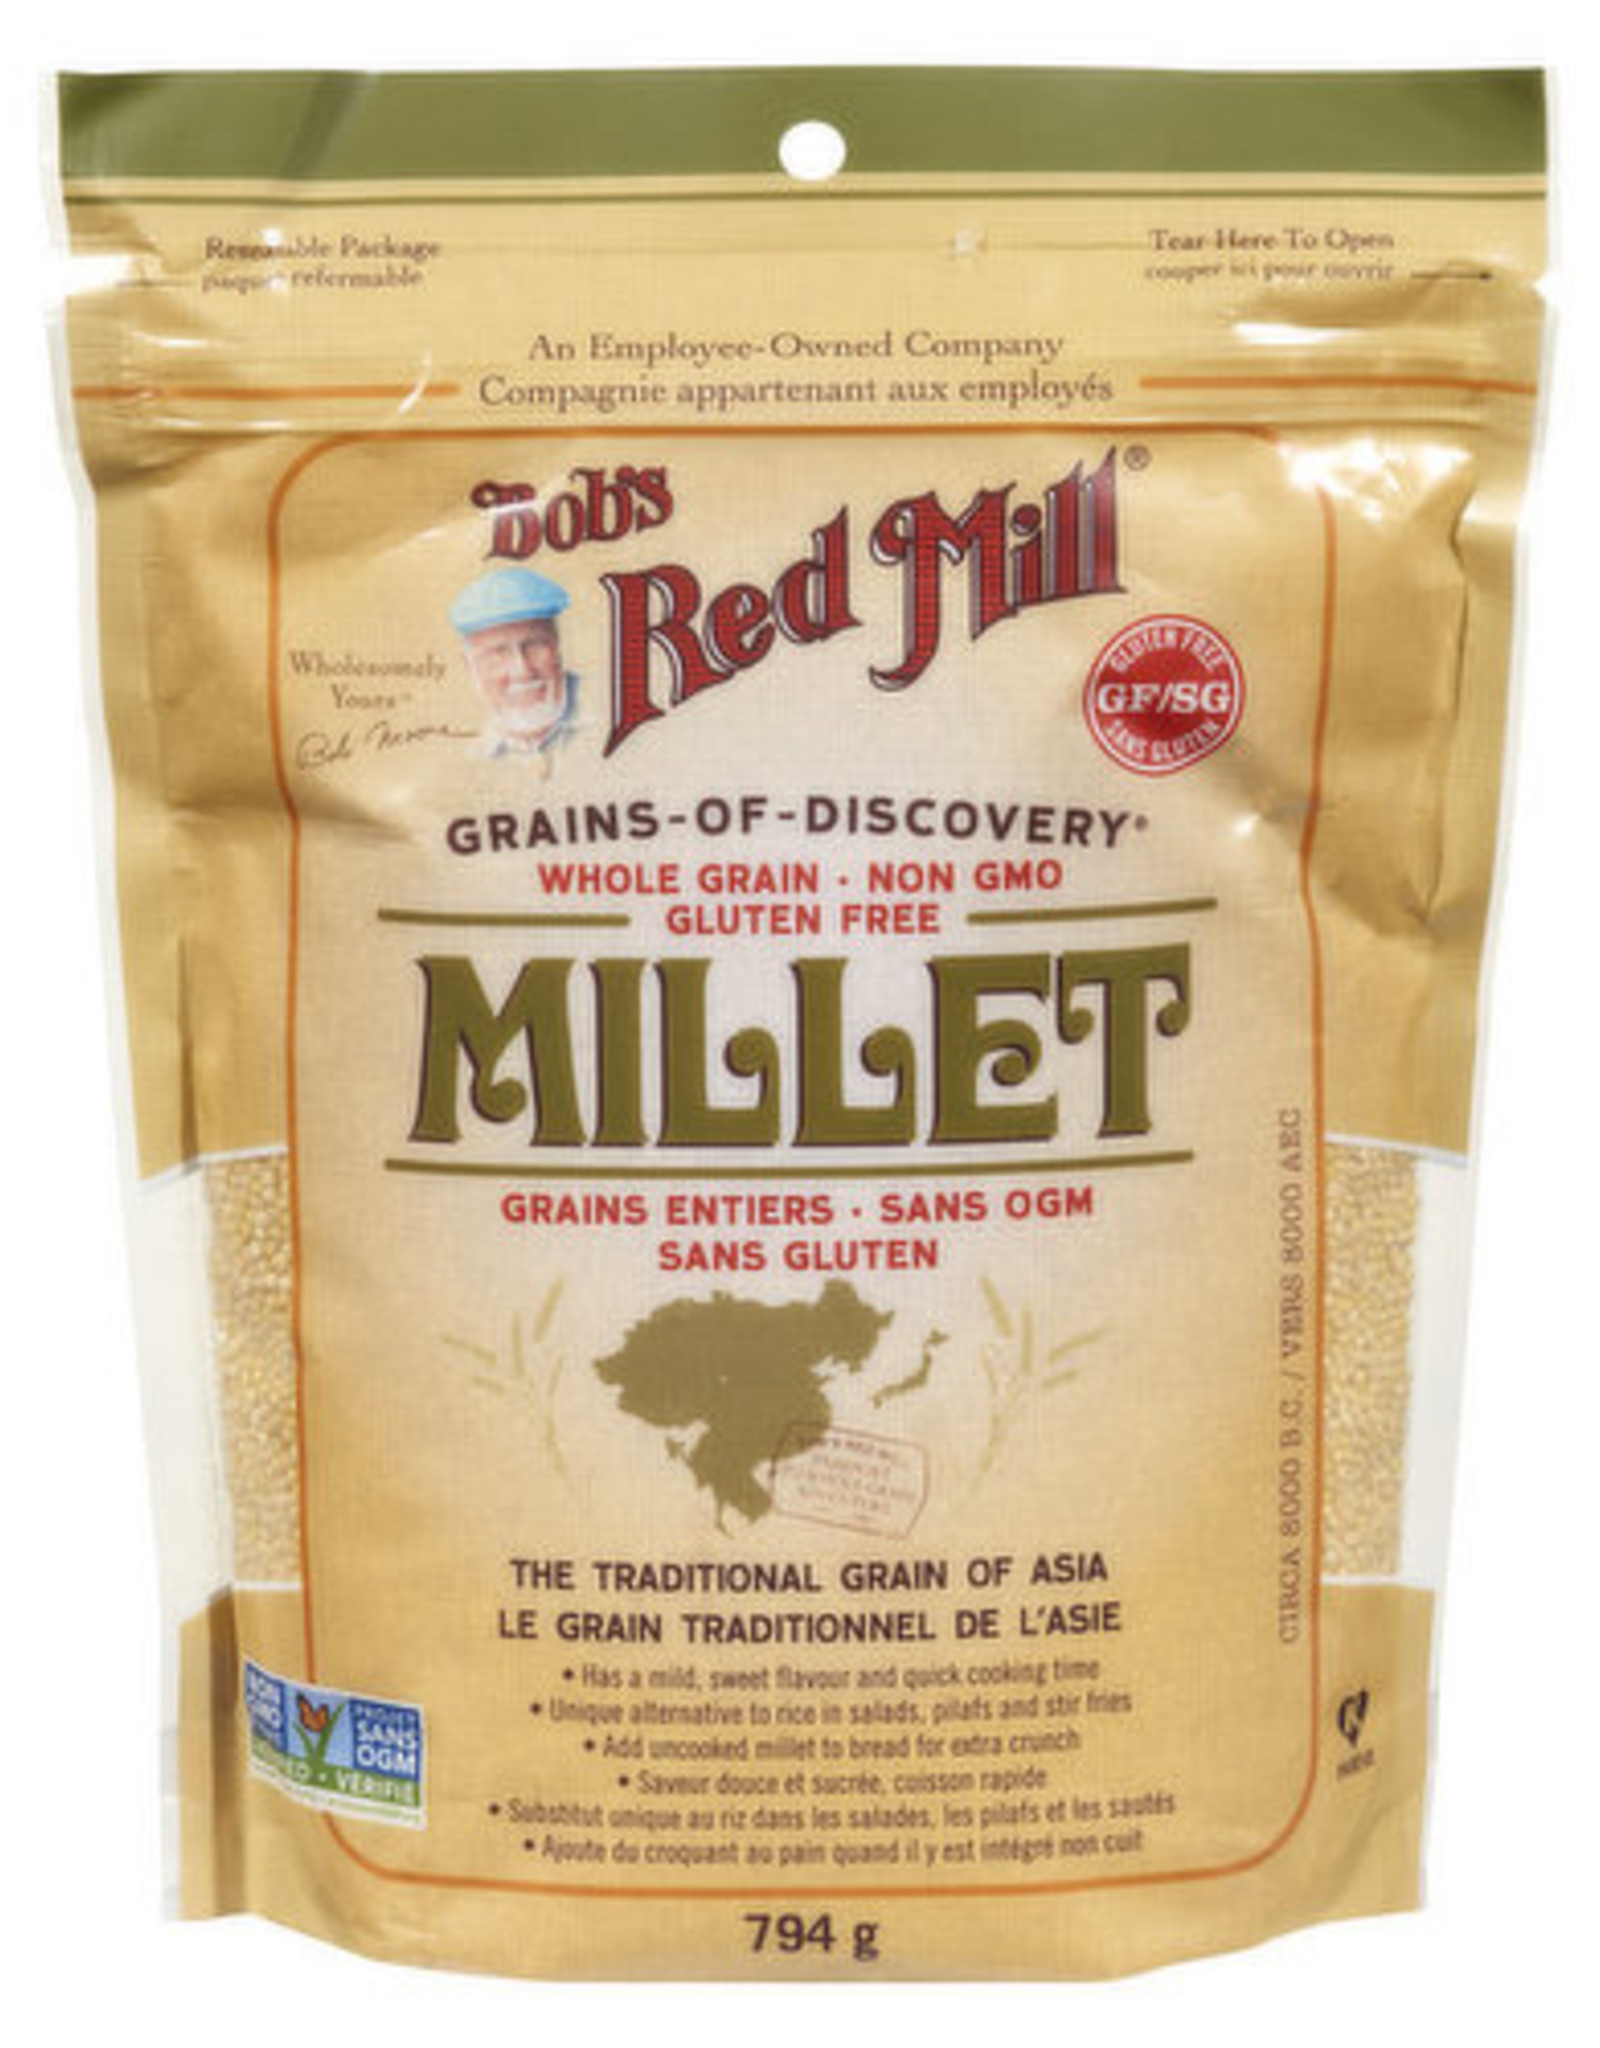 Bob's Red Mill Bob's Red Mill - Millet Grains Entiers (794g)